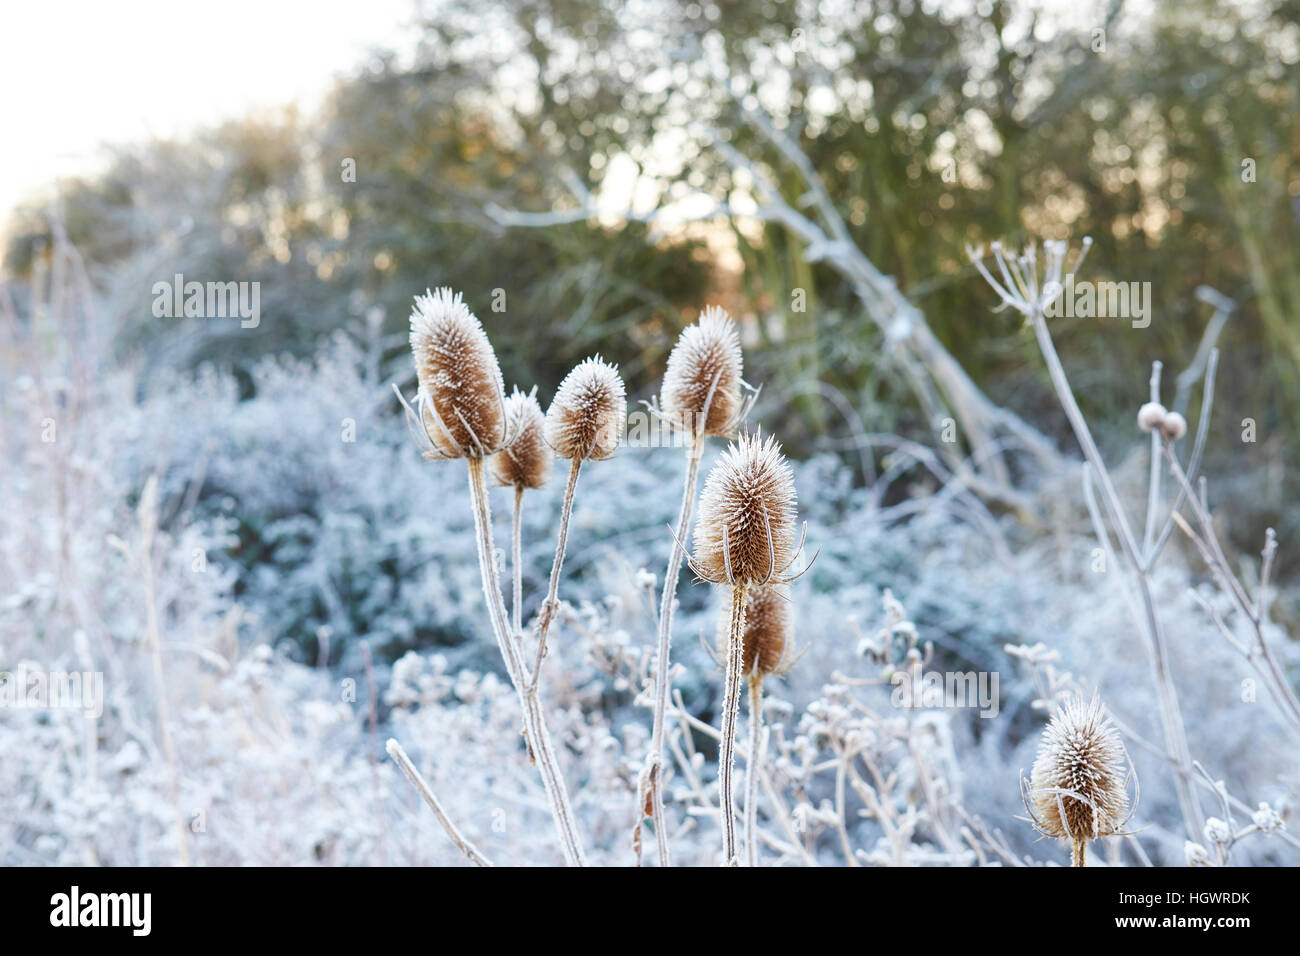 Frosted Teasel (Dipsacus fullonum) dead conical flower heads. Stock Photo